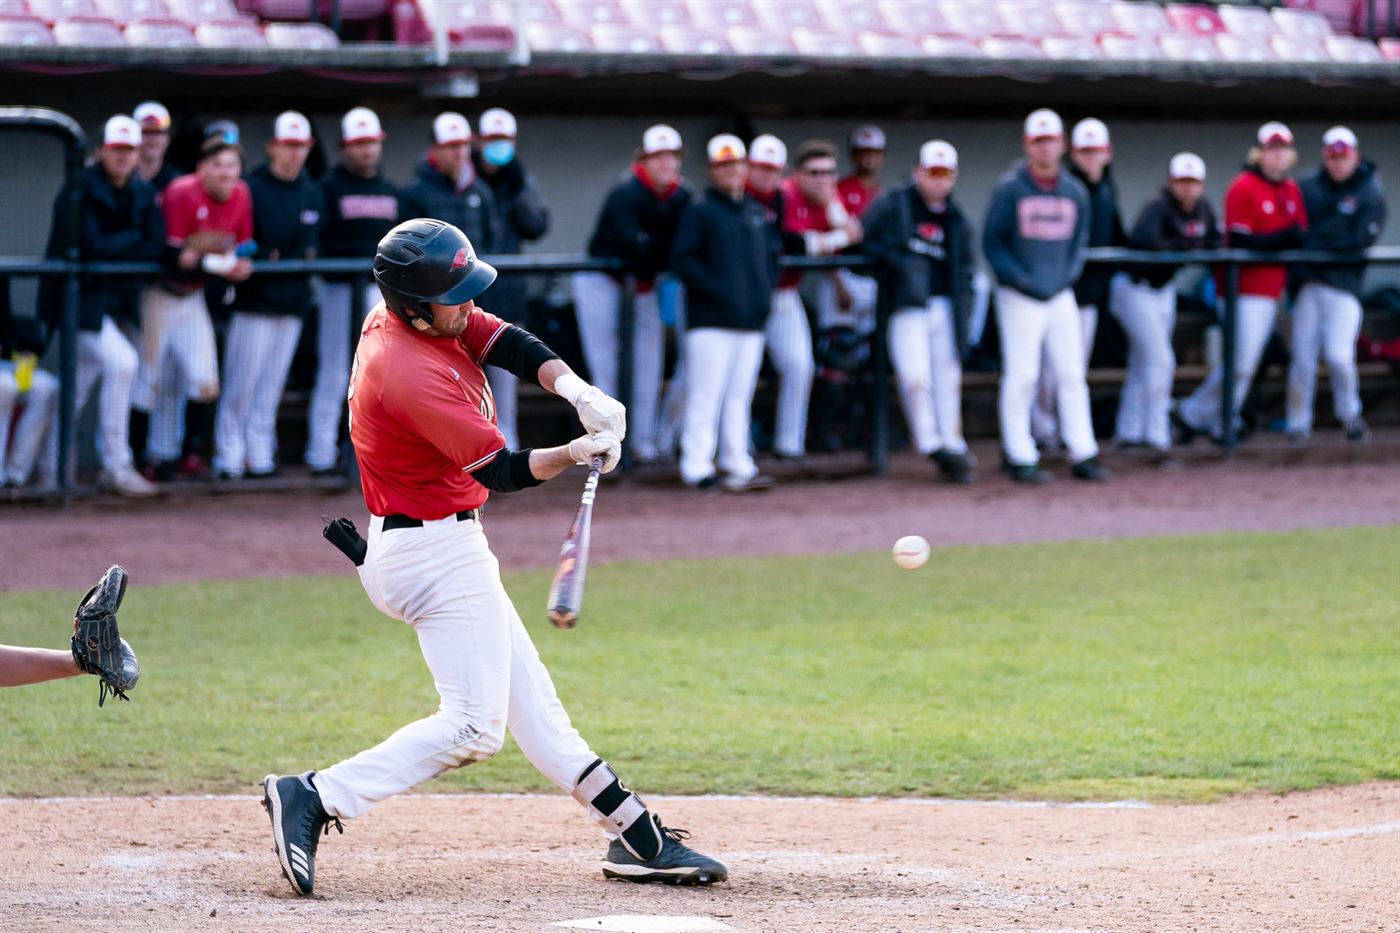 A Montclair State player takes a swing at the ball. Chris Krusberg | The Montclarion